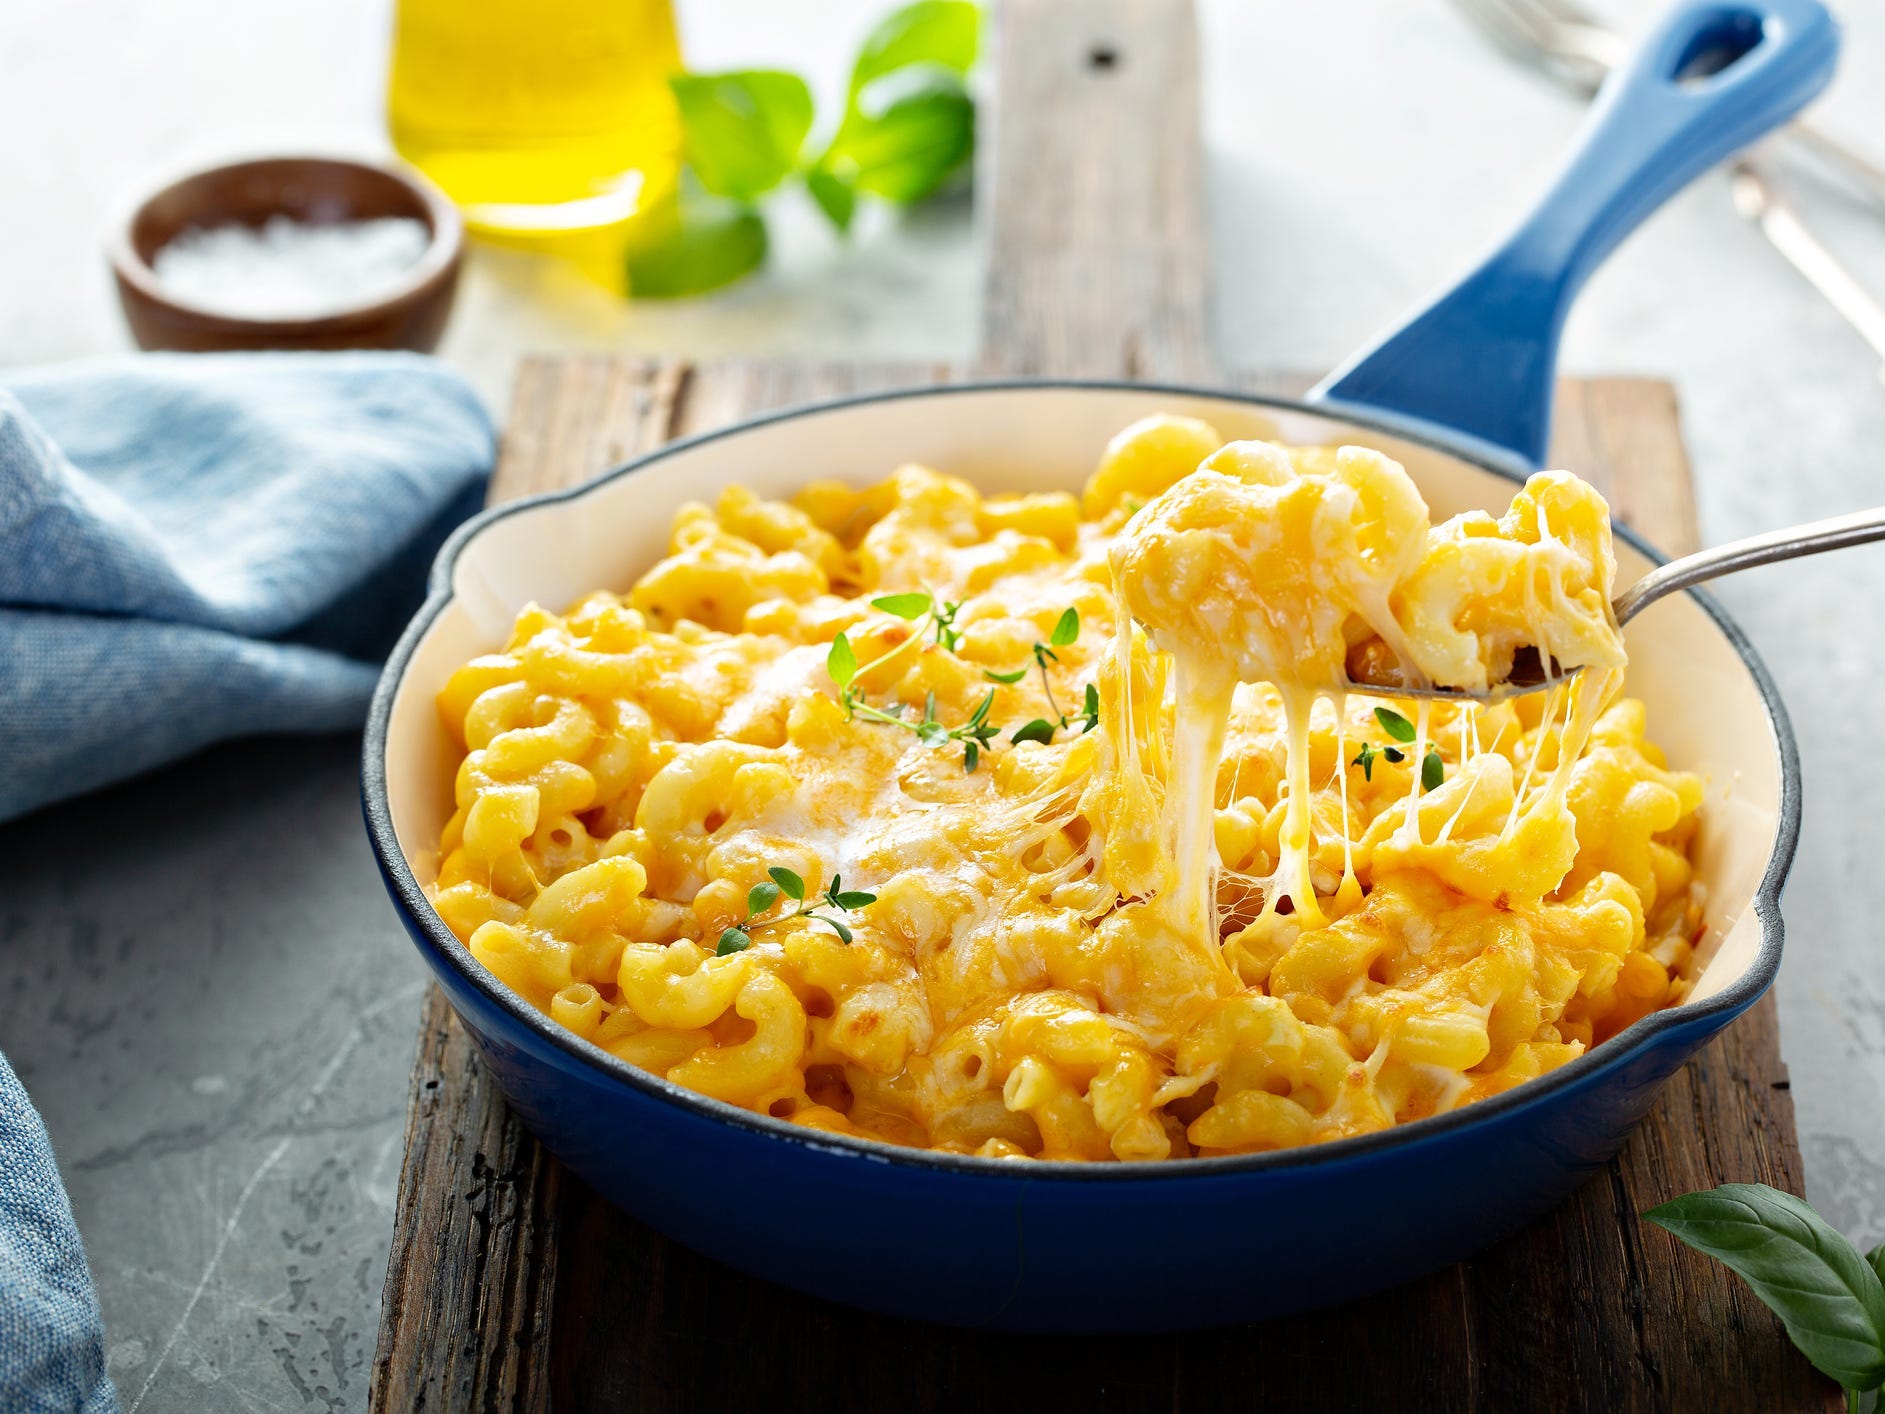 A fork holding a large bite of macaroni and cheese out of a blue skillet full of it